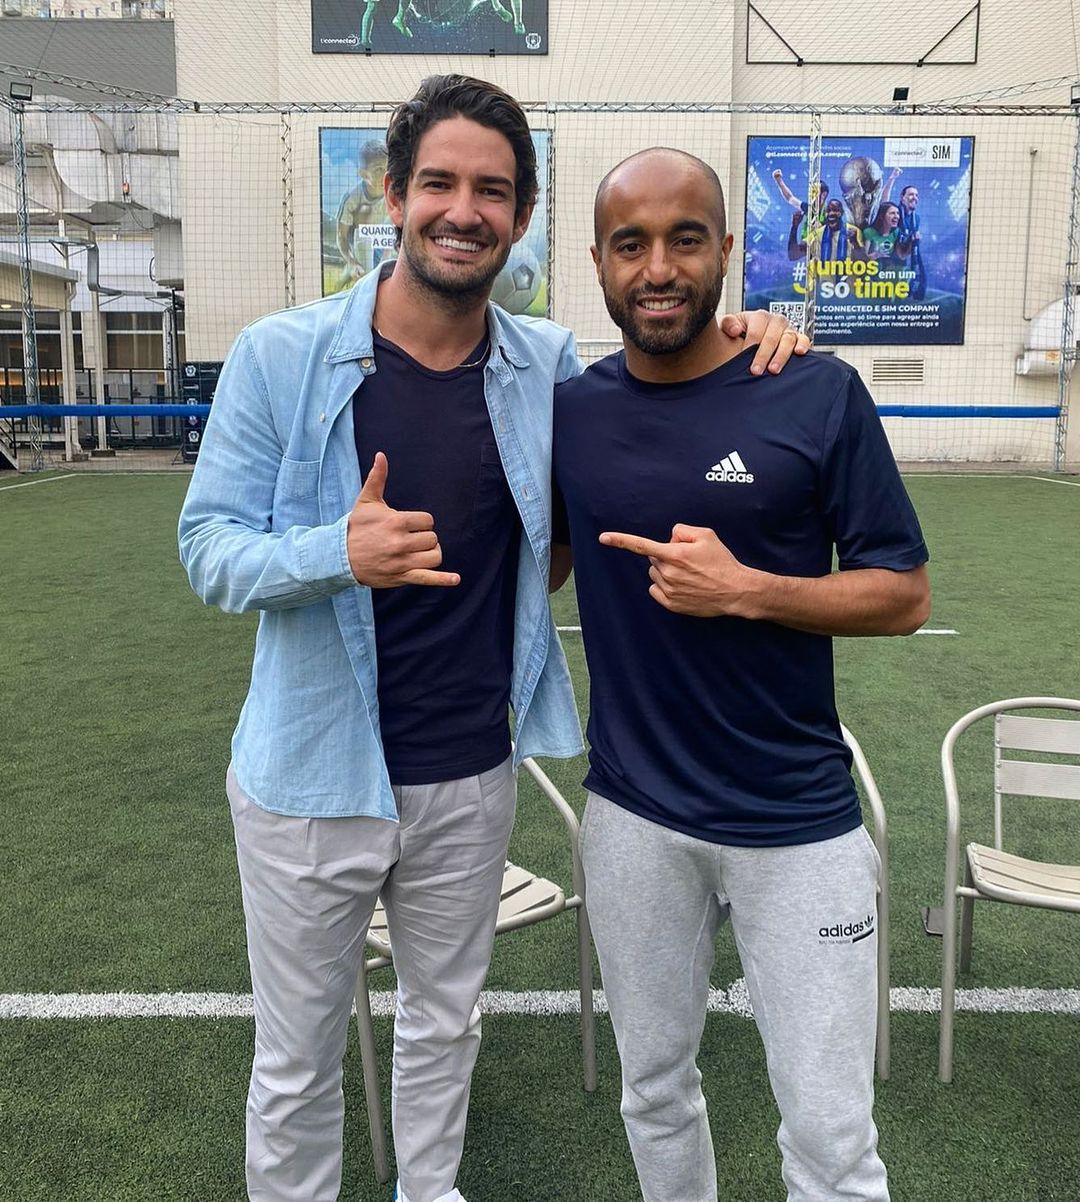 One of the top publications of @lucasmoura7 which has 64.8K likes and 844 comments